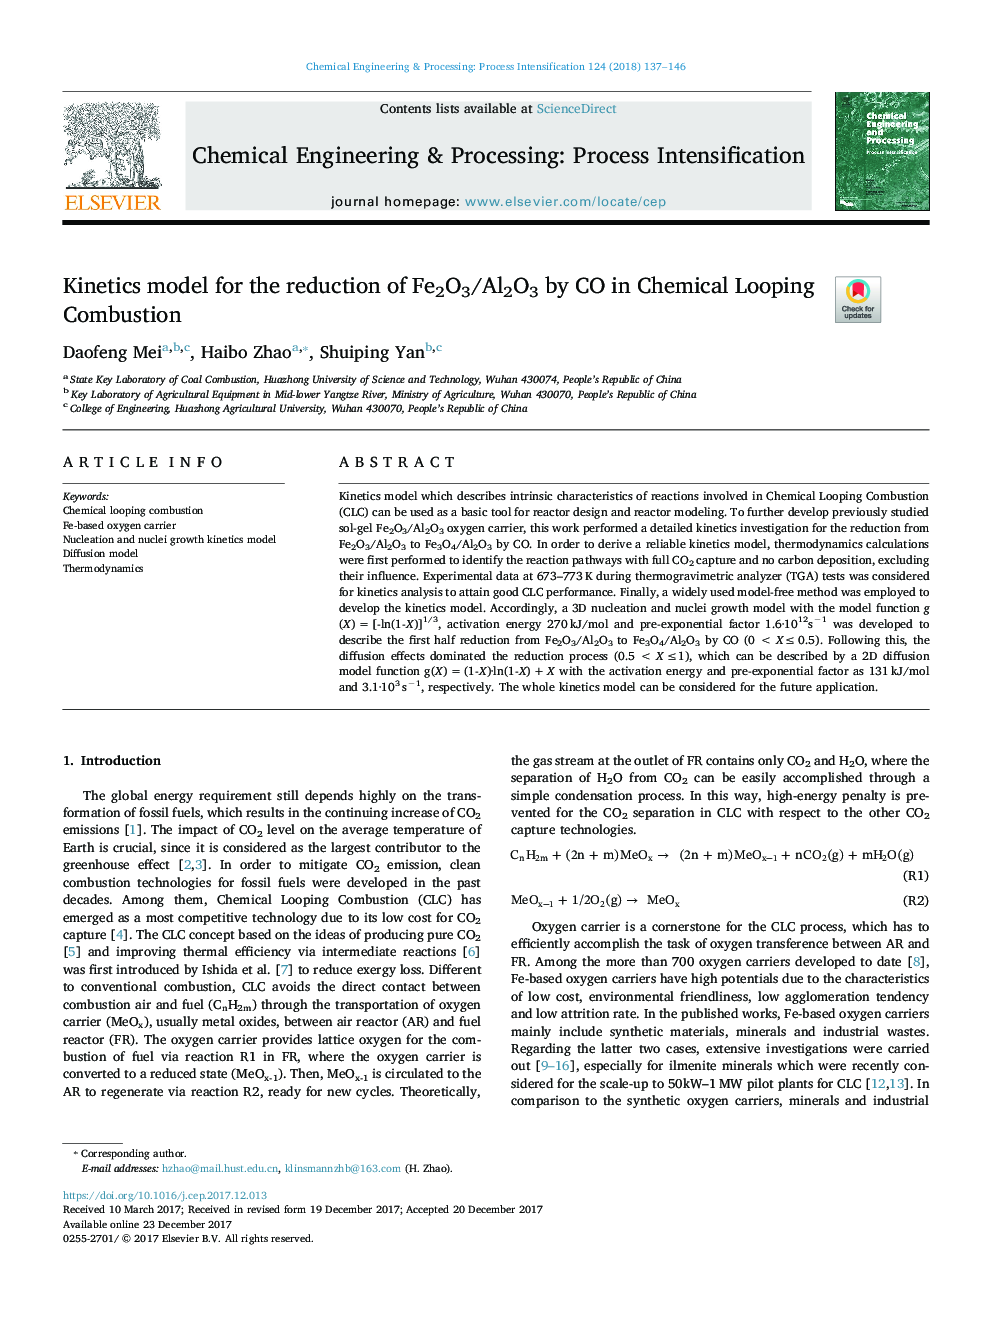 Kinetics model for the reduction of Fe2O3/Al2O3 by CO in Chemical Looping Combustion